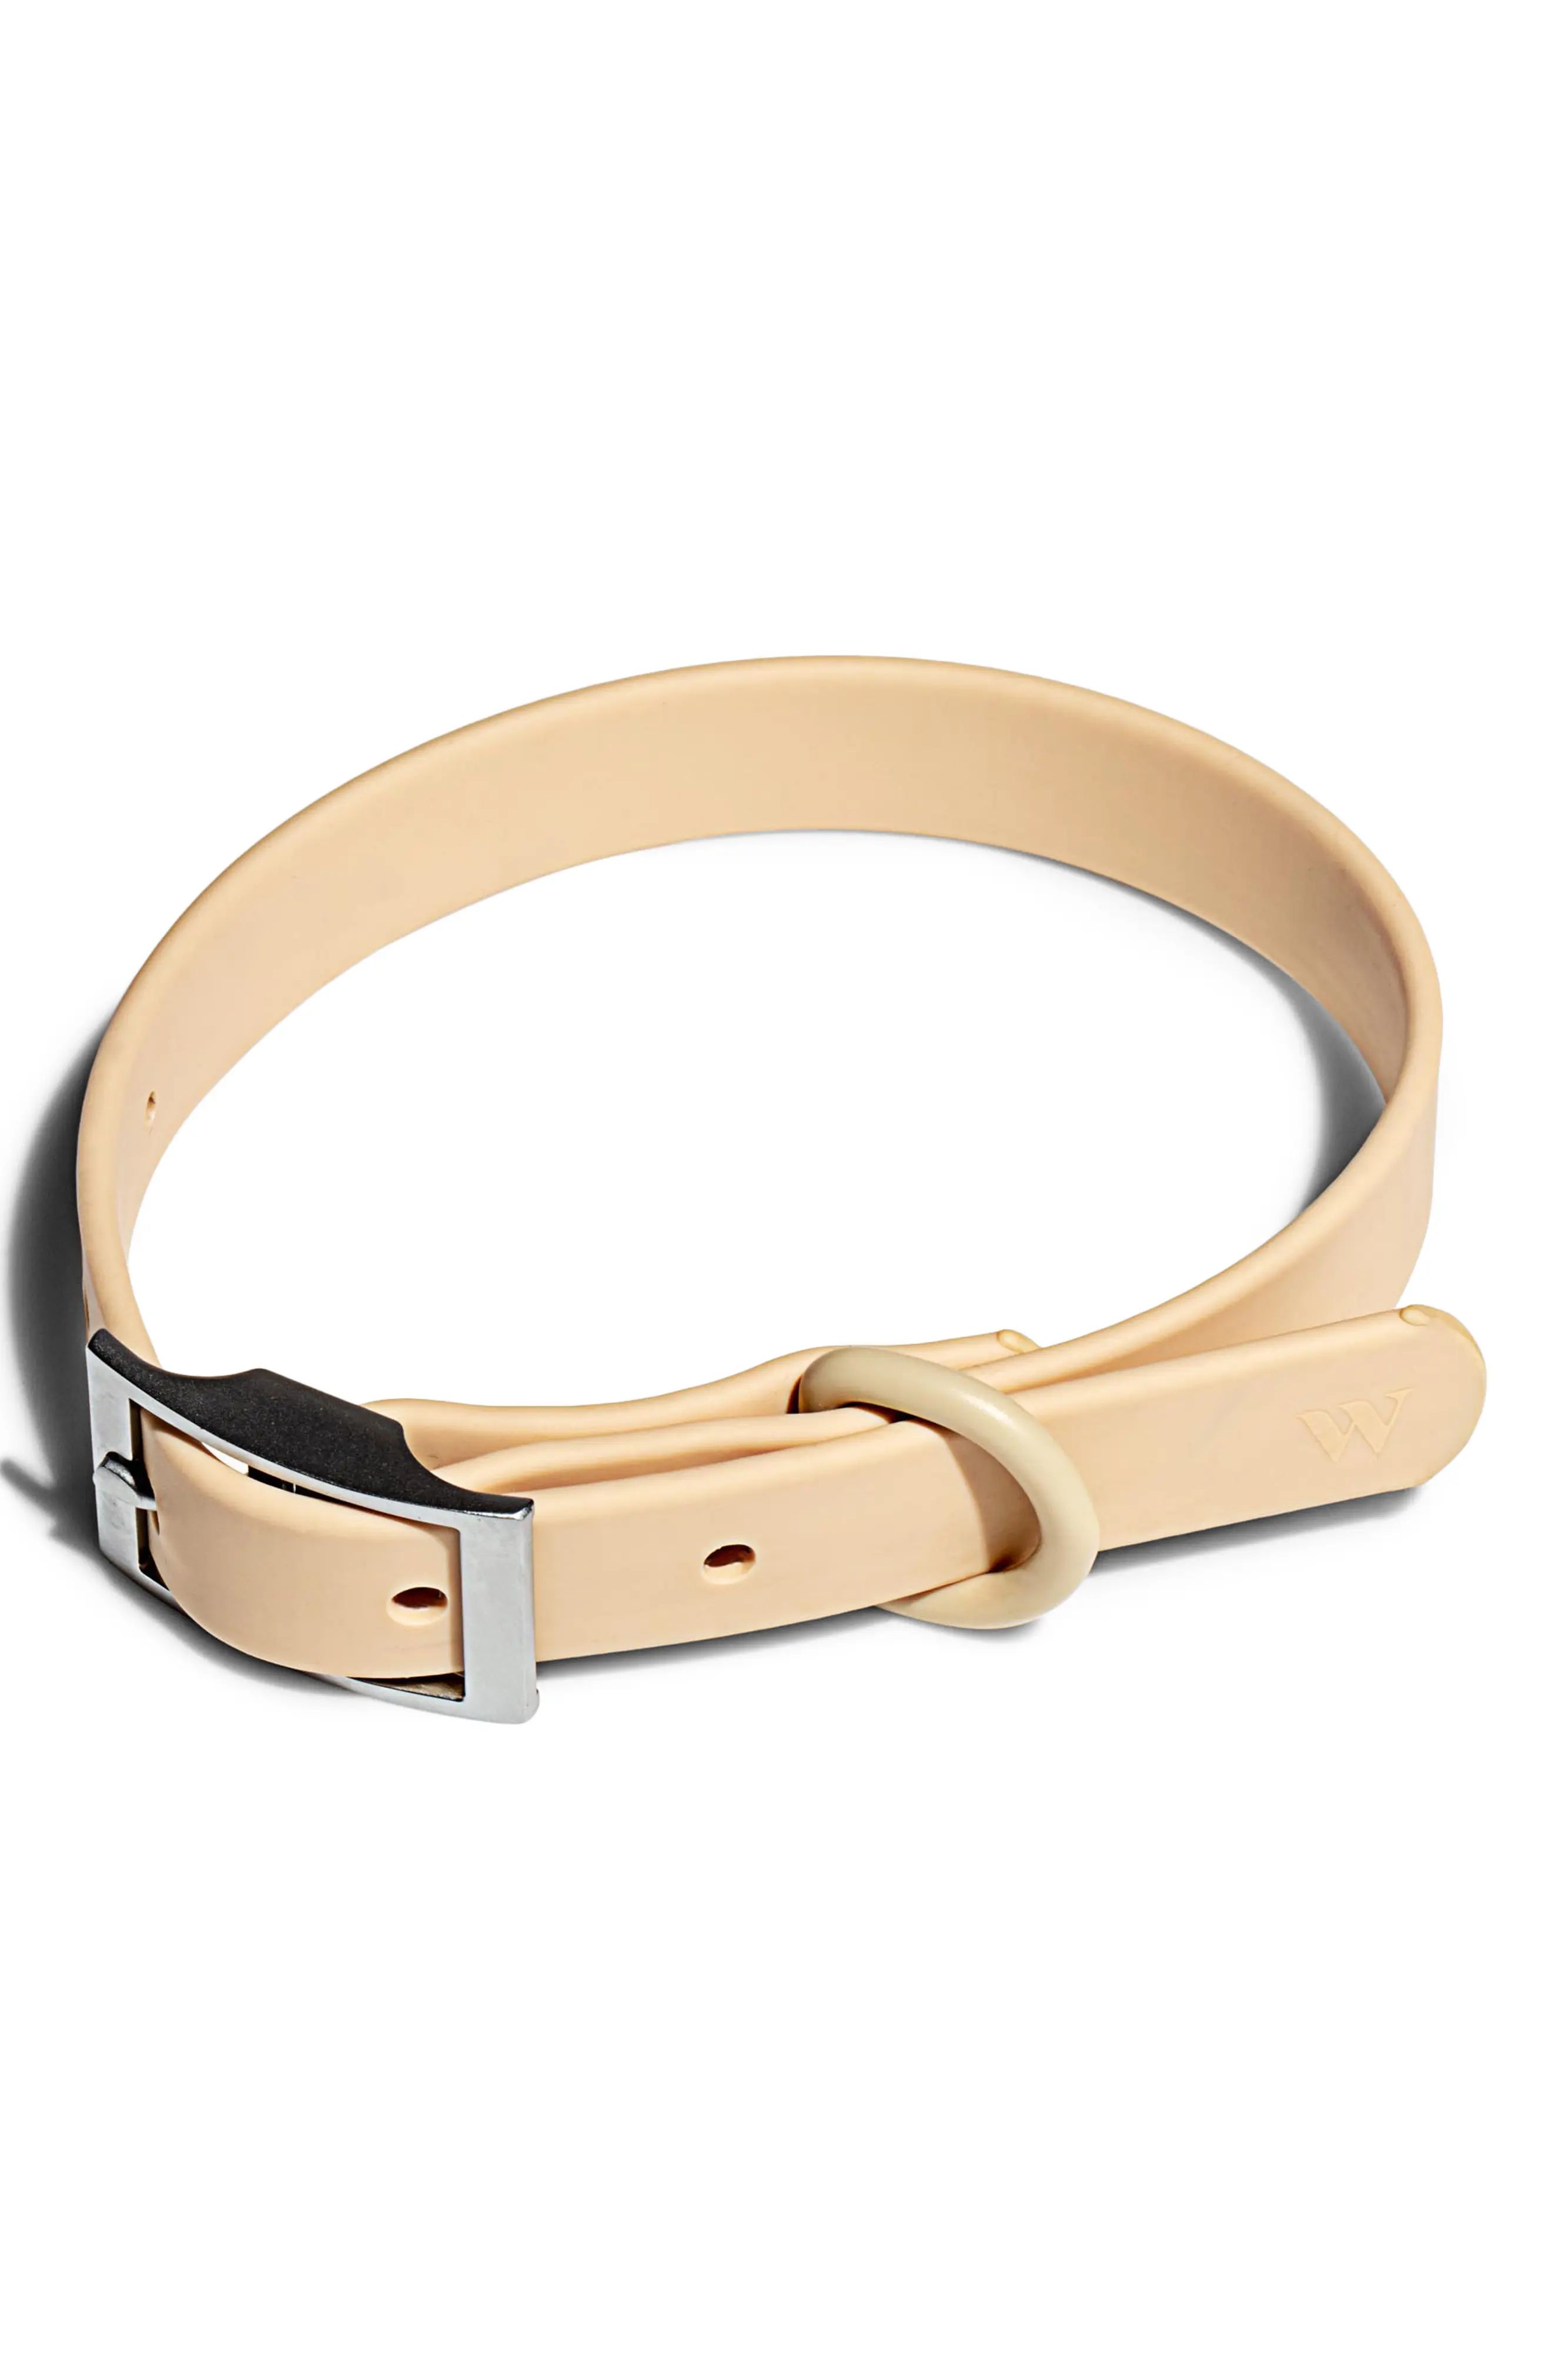 Wild One All-Weather Dog Collar, Size Large - Beige | Nordstrom